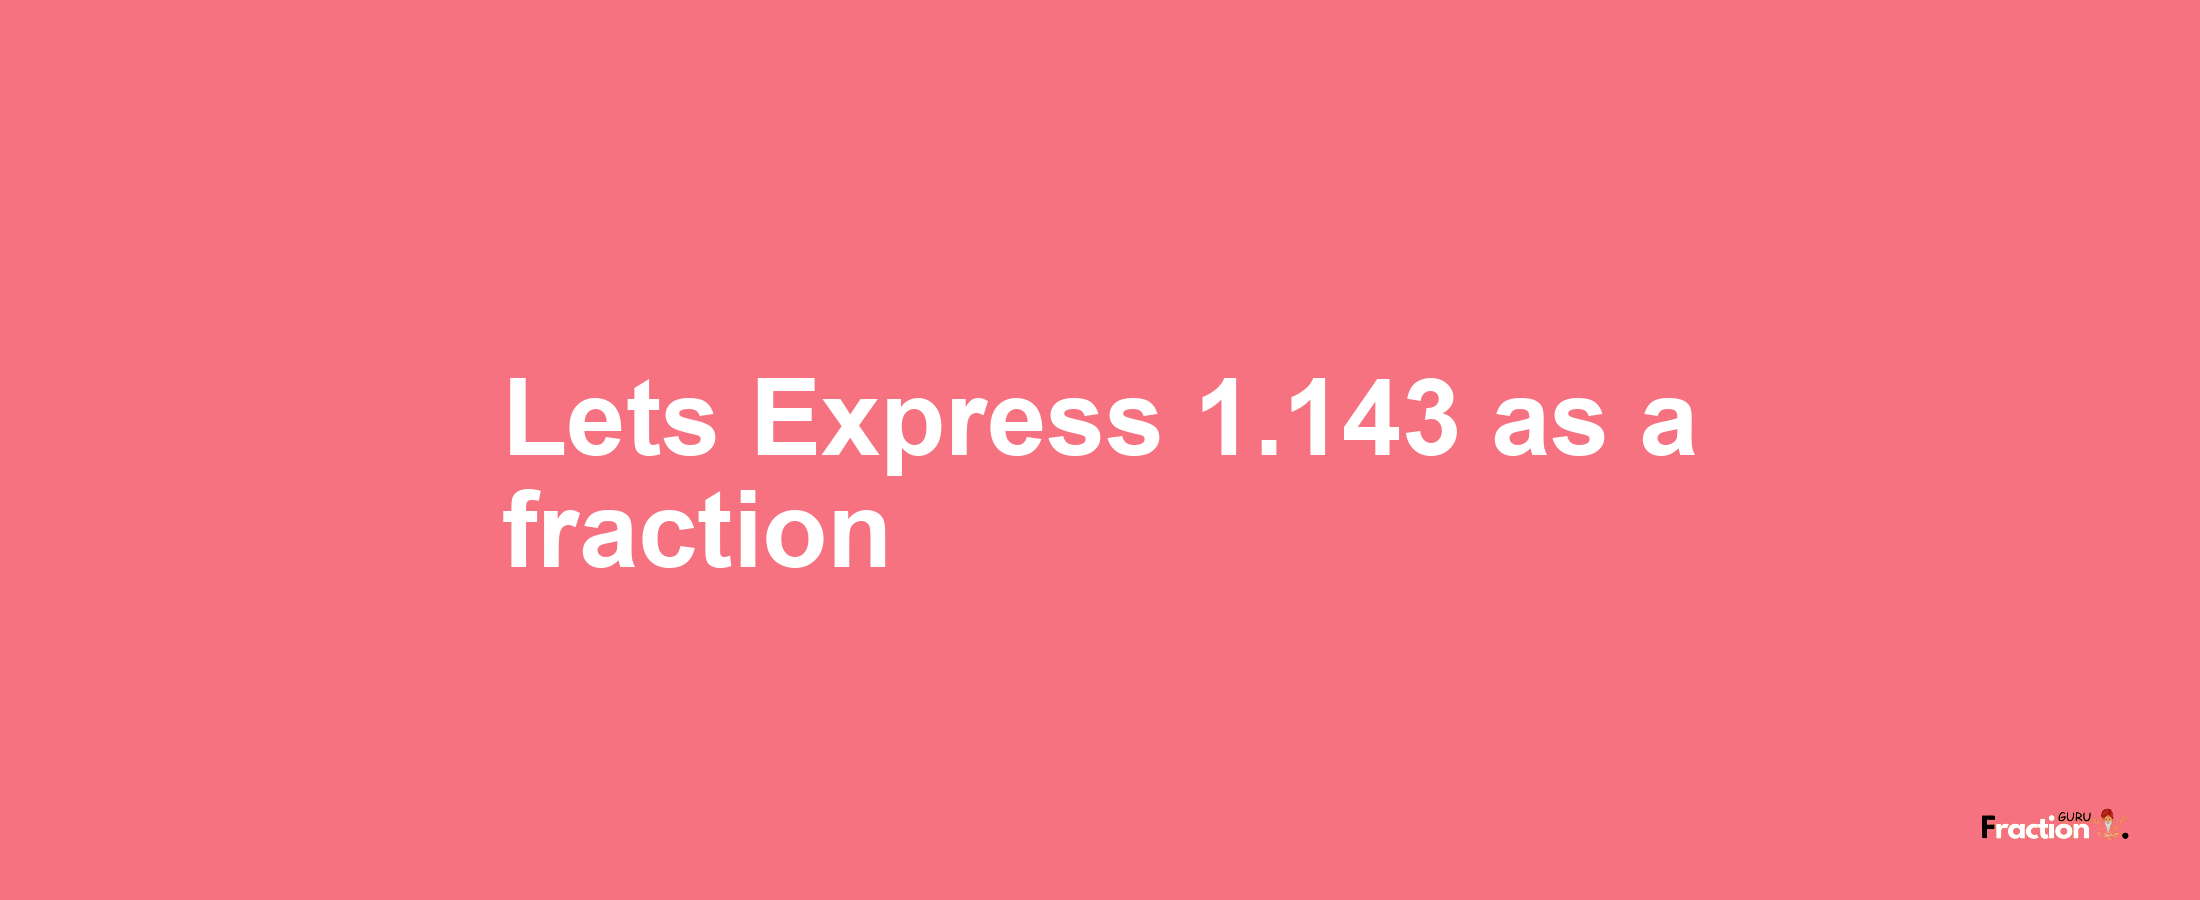 Lets Express 1.143 as afraction